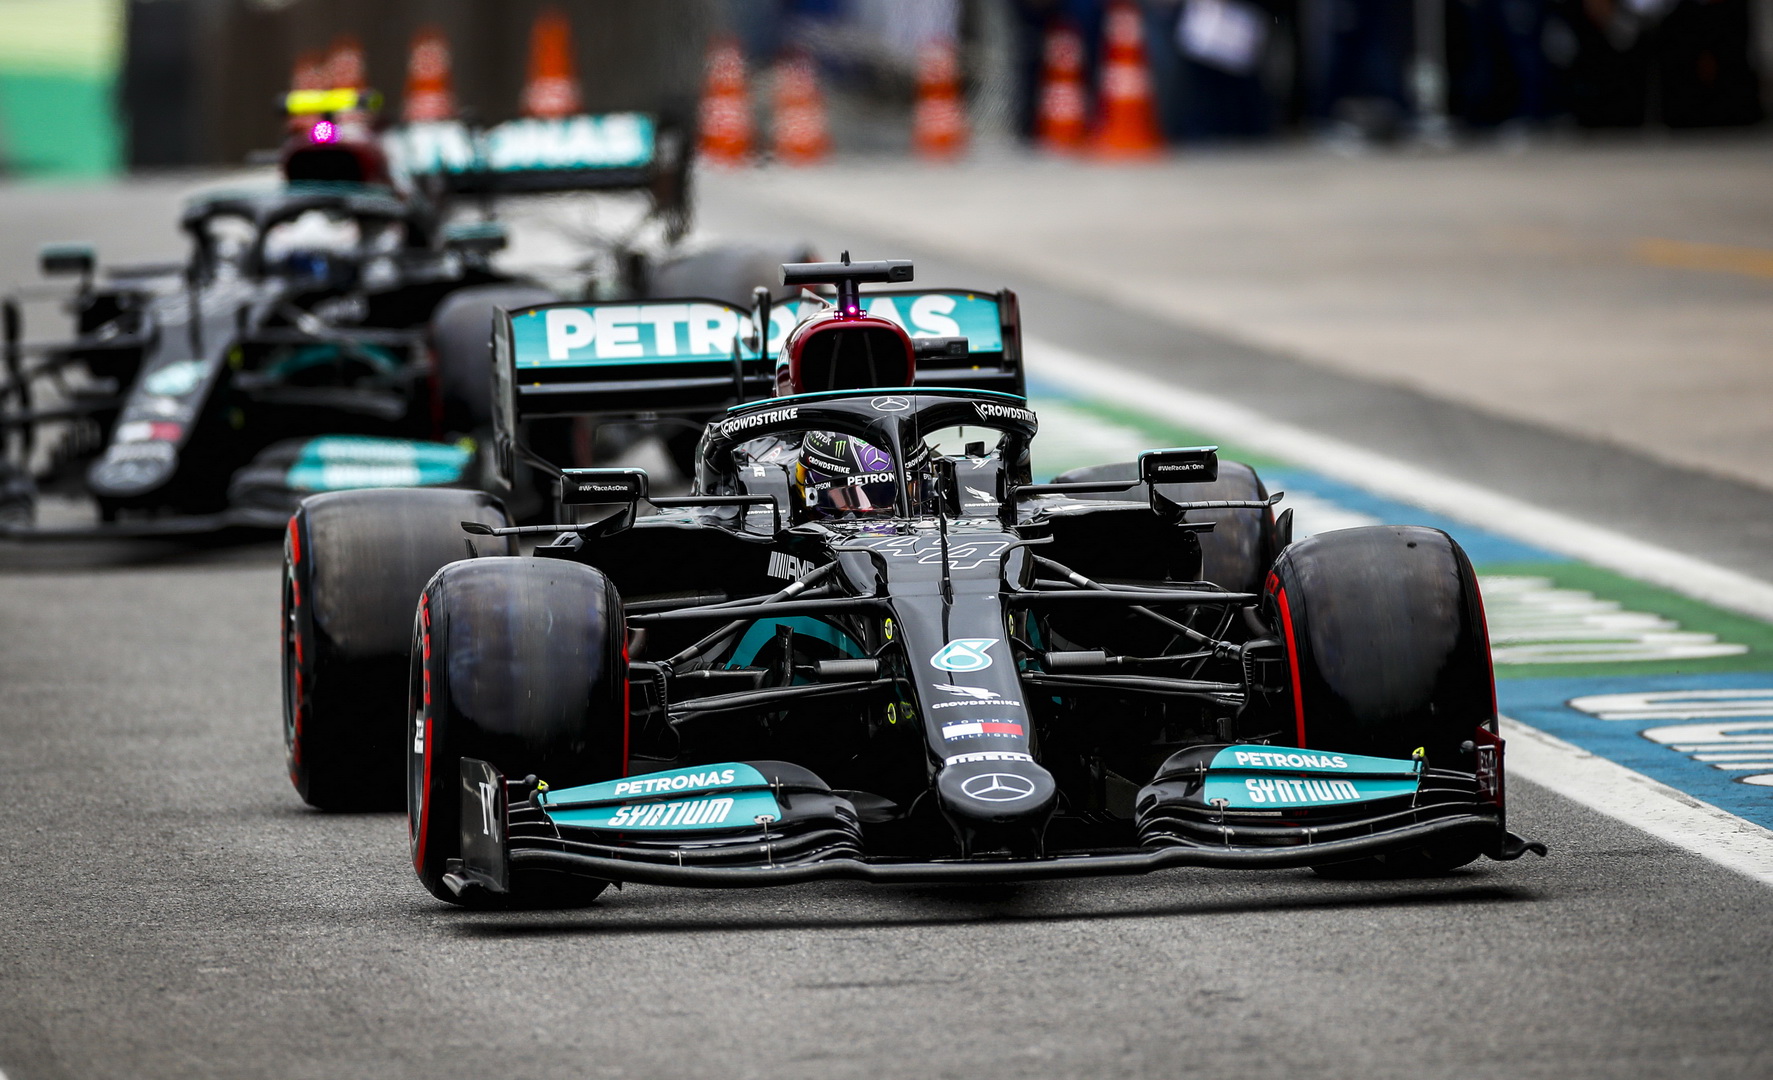 Lewis Hamilton Says His 2021 Mercedes Amg W12 F1 Car Is A “monster Diva